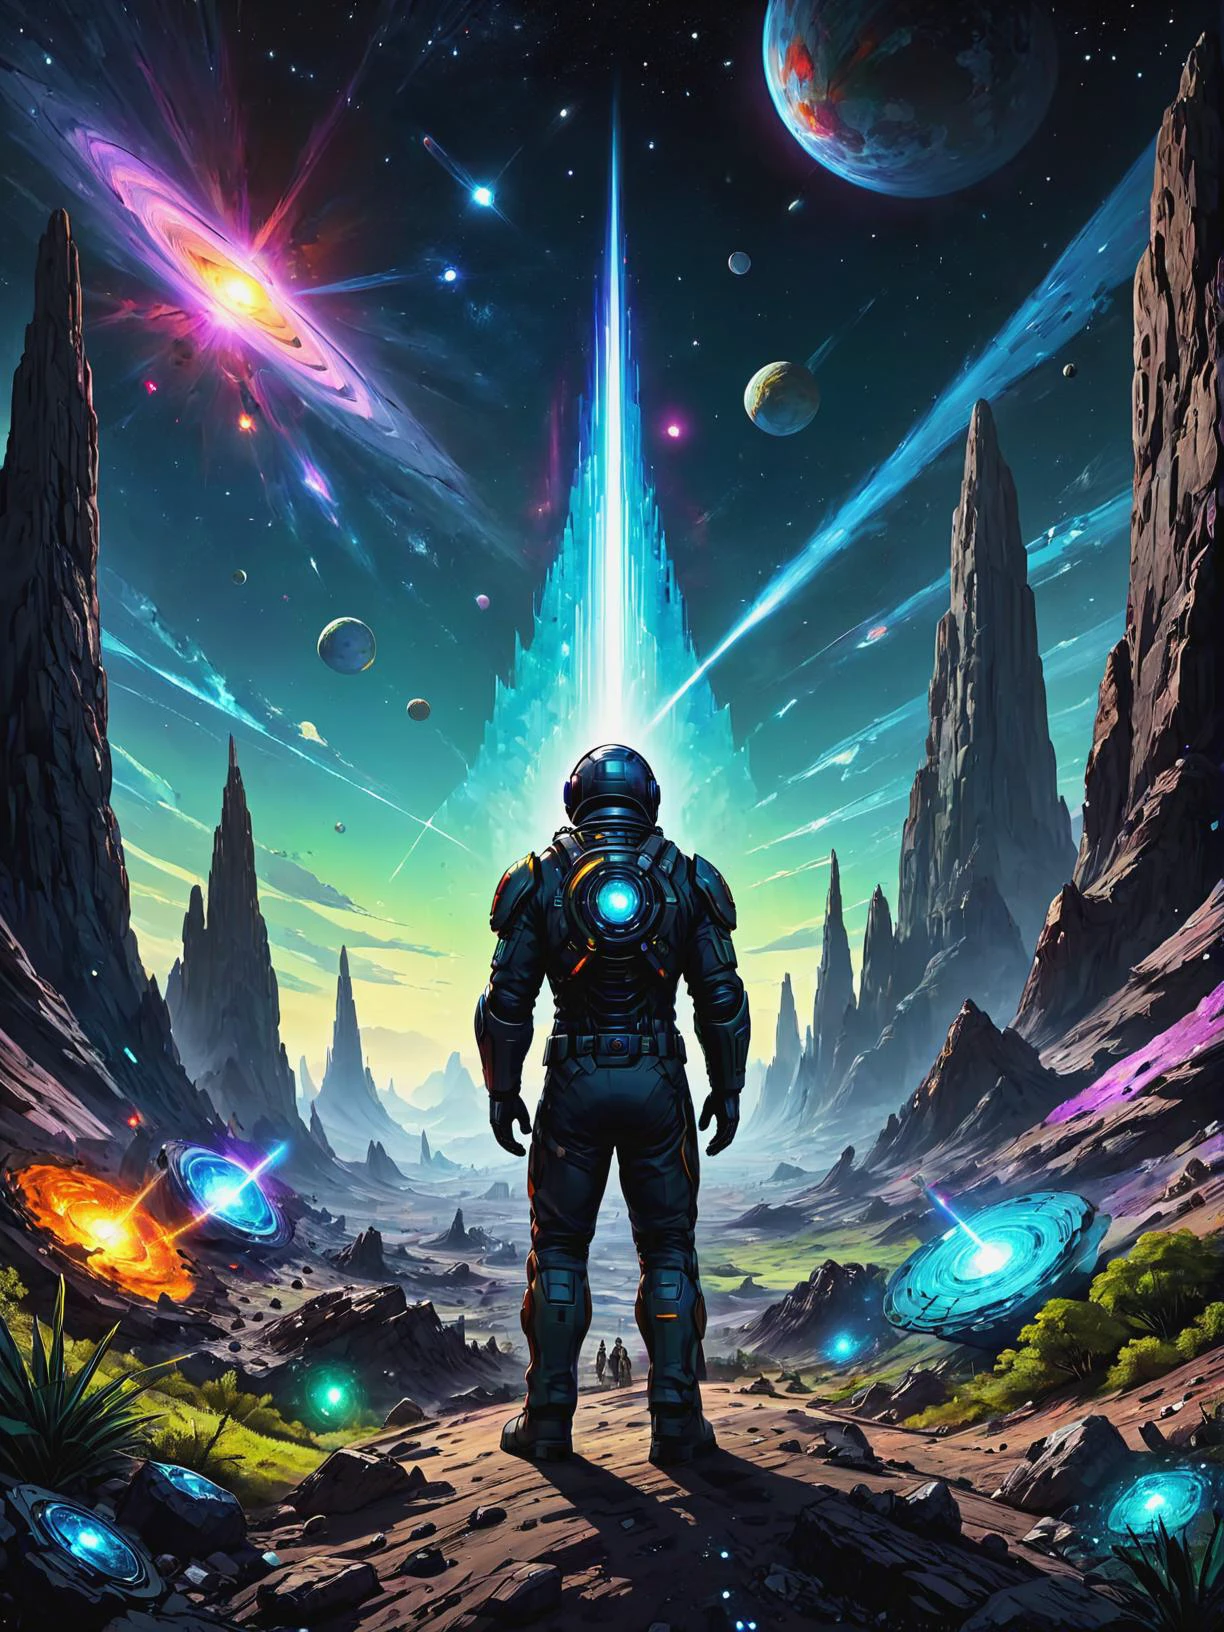 Psionic illusionist creating holographic diversions in Inhabited asteroid colony facing cosmic anomalies, ultra-fine digital painting, PENeonUV